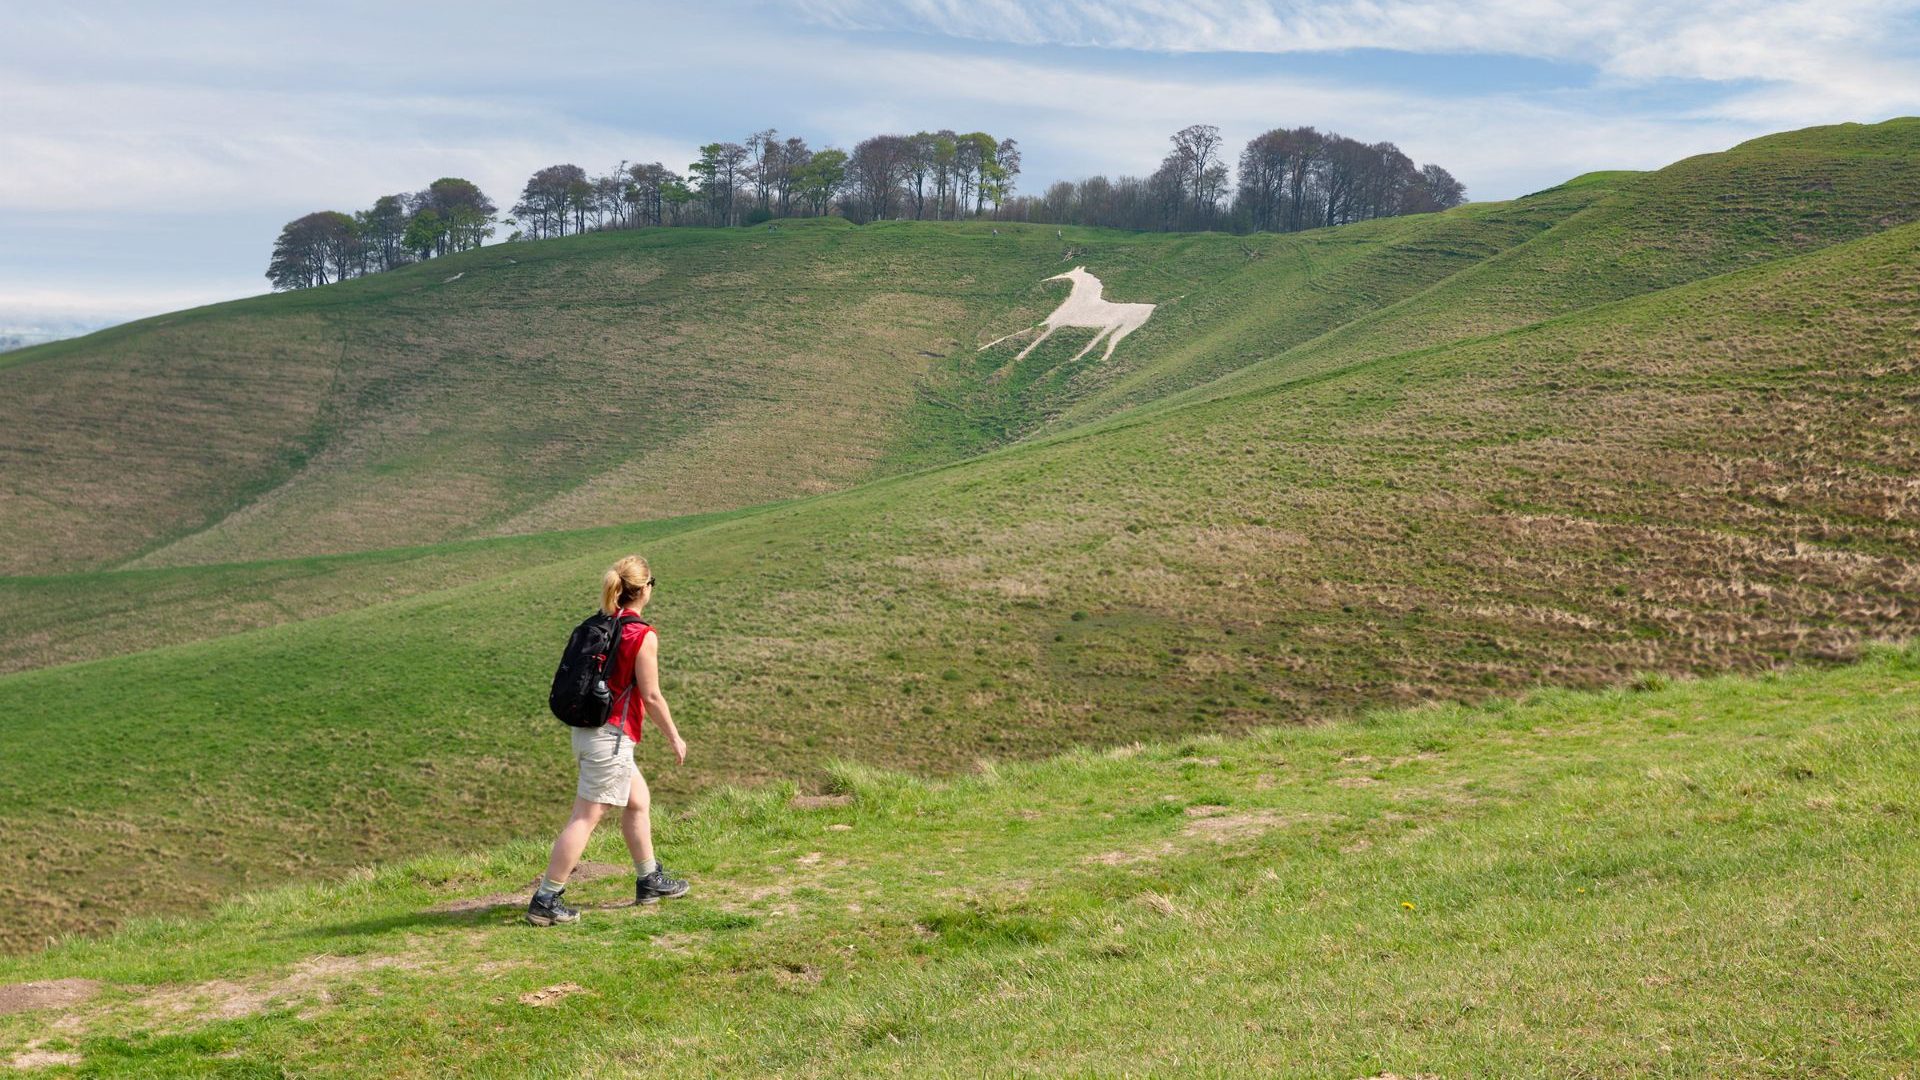 Lady walking in Wiltshire up the hill where the ancient Cherhill White Horse chalk carving is